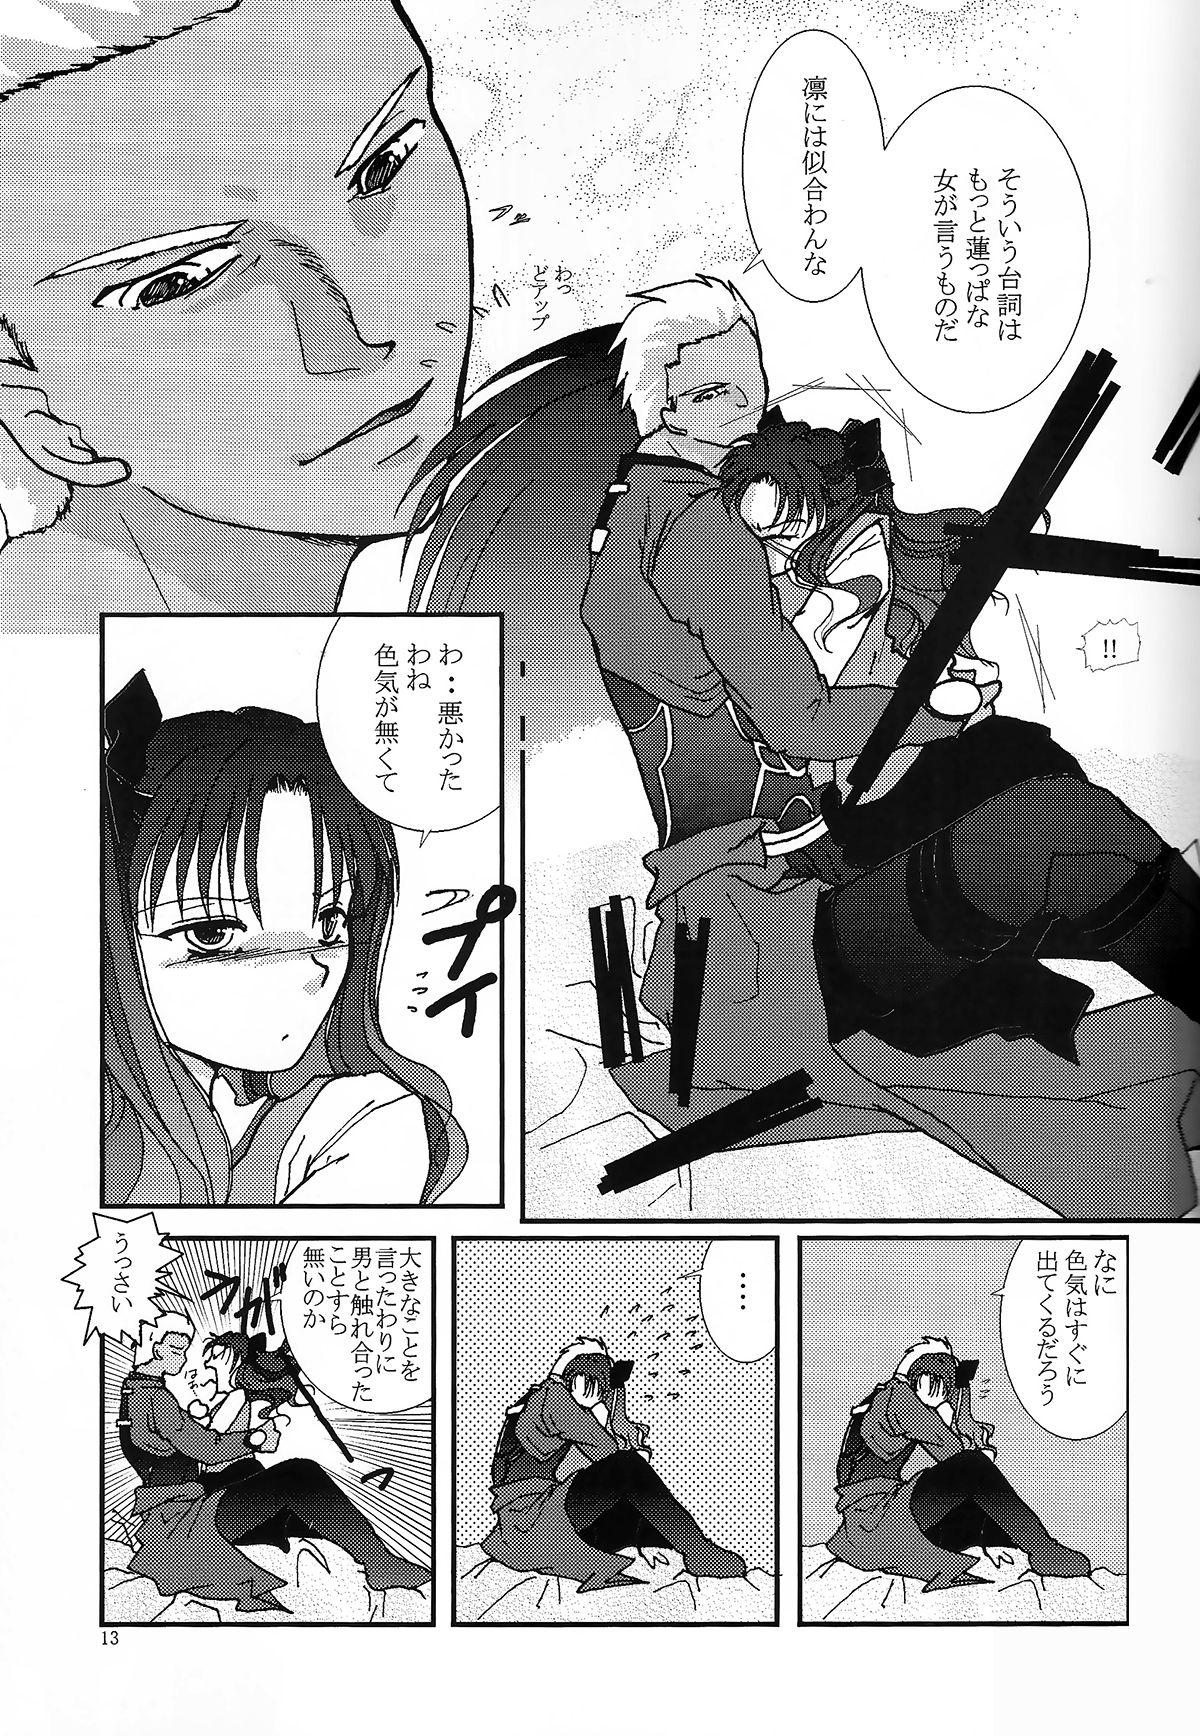 Arab Question-7 - Fate stay night Bubble Butt - Page 11